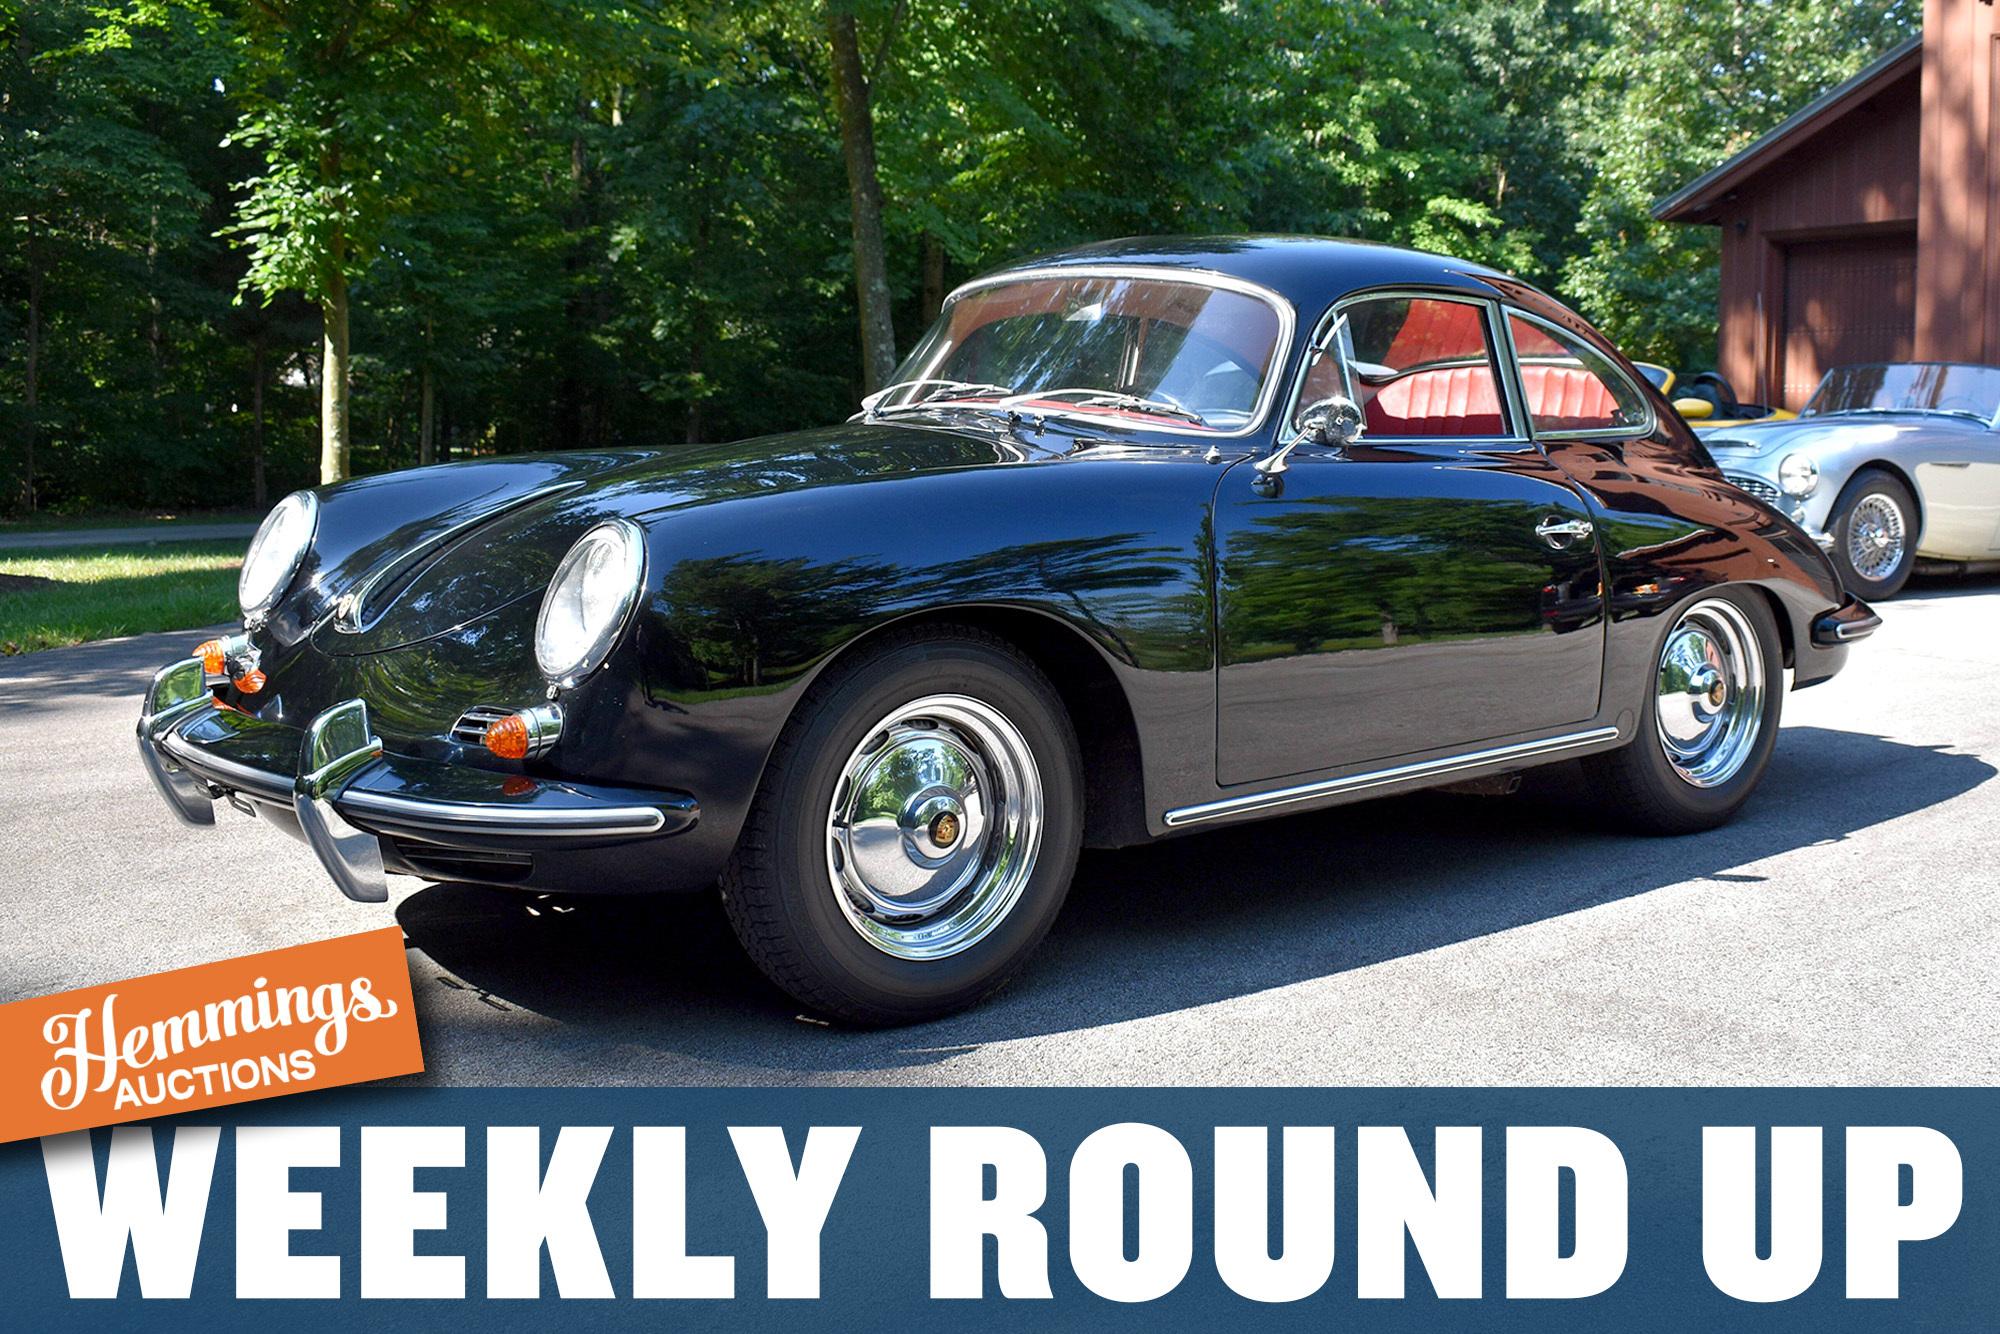 A low-mile 1960 Porsche 356 B, AMC Rambler American Rogue, and modern Shelby GT500: Hemmings Auctions Weekly Round Up for November 13-19, 2022